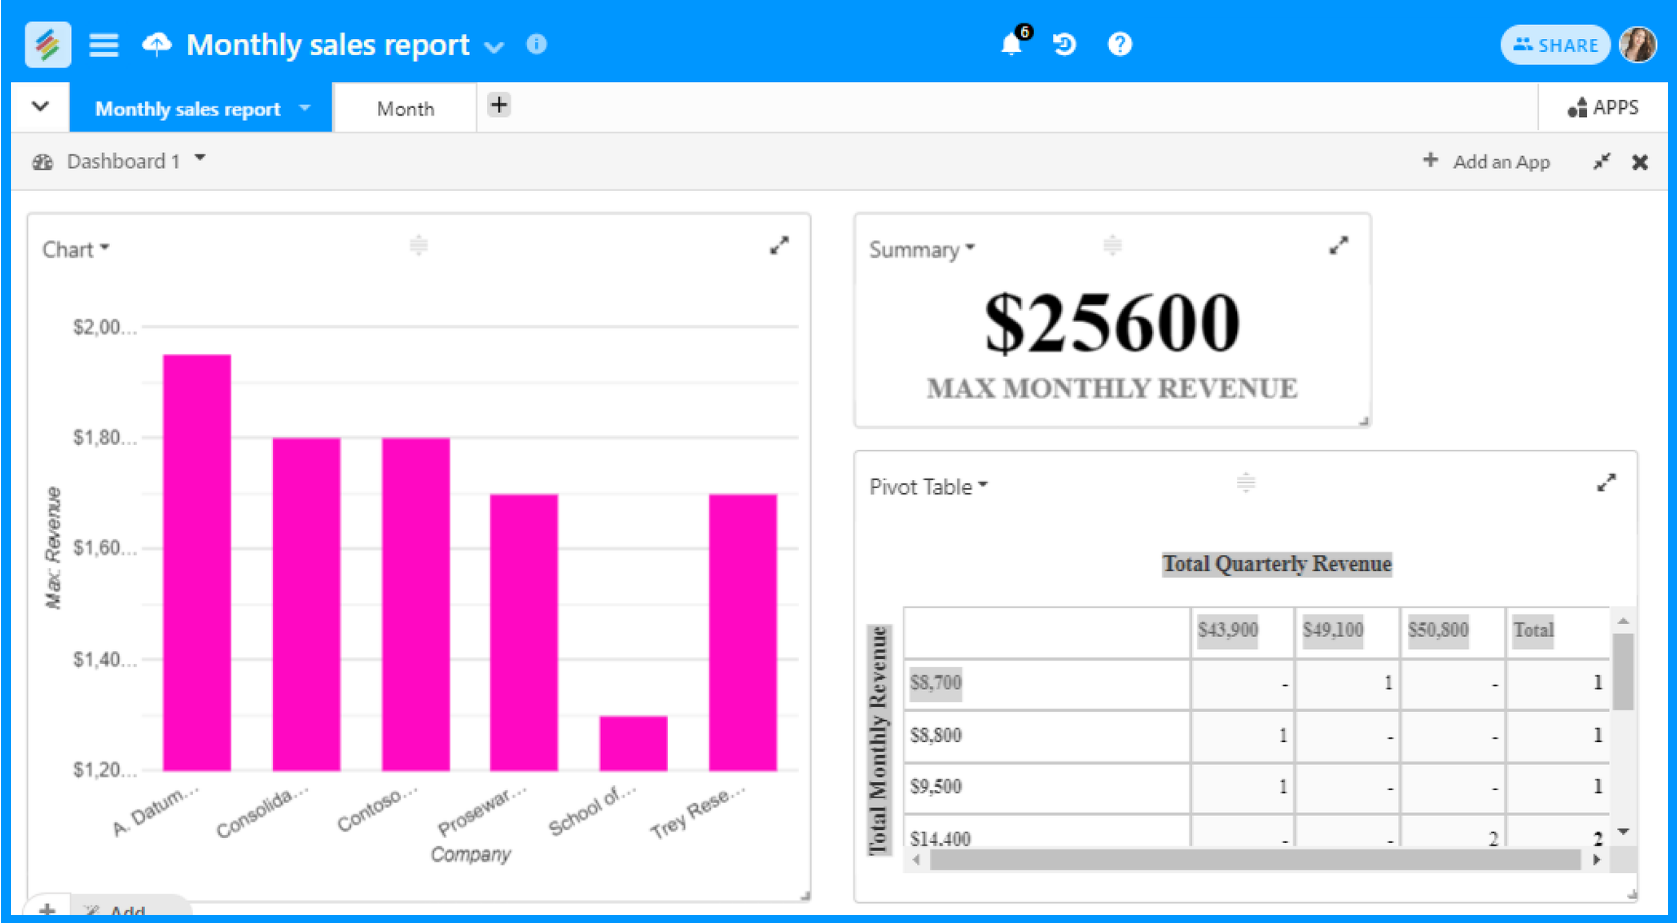 Step 5 to Creating KPI dashboards in Stackby: Create KPI dashboards with Charts, Pivot Tables, and Summary Boxes.